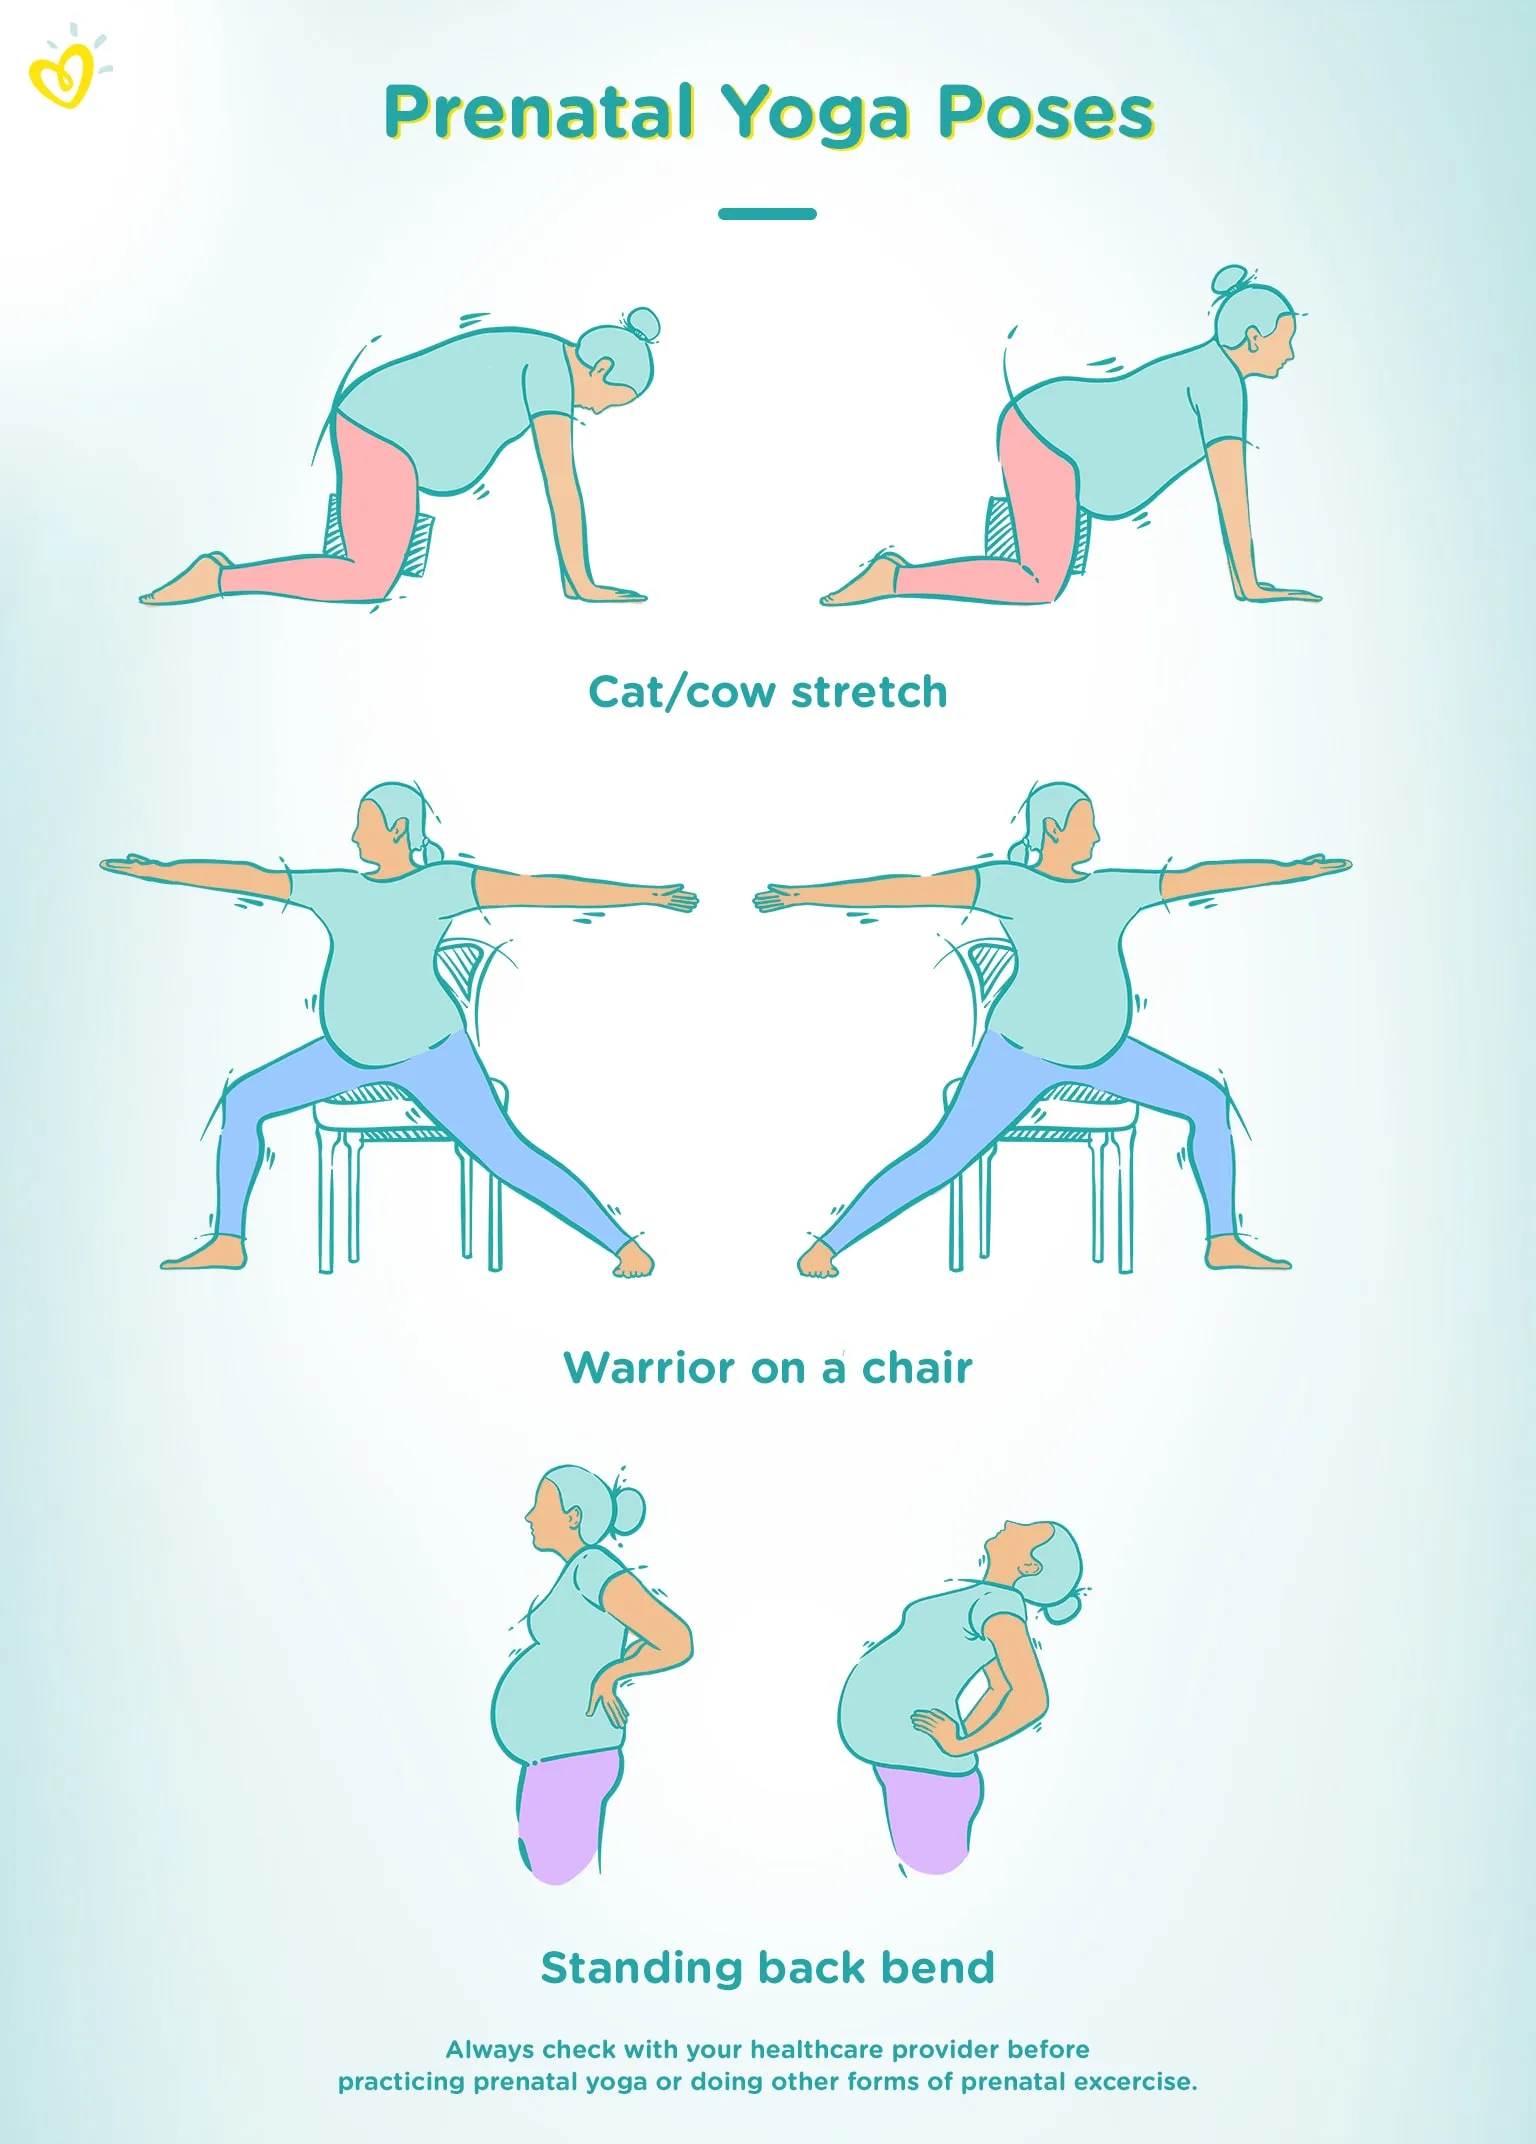 Prenatal yoga: benefits for mind and body